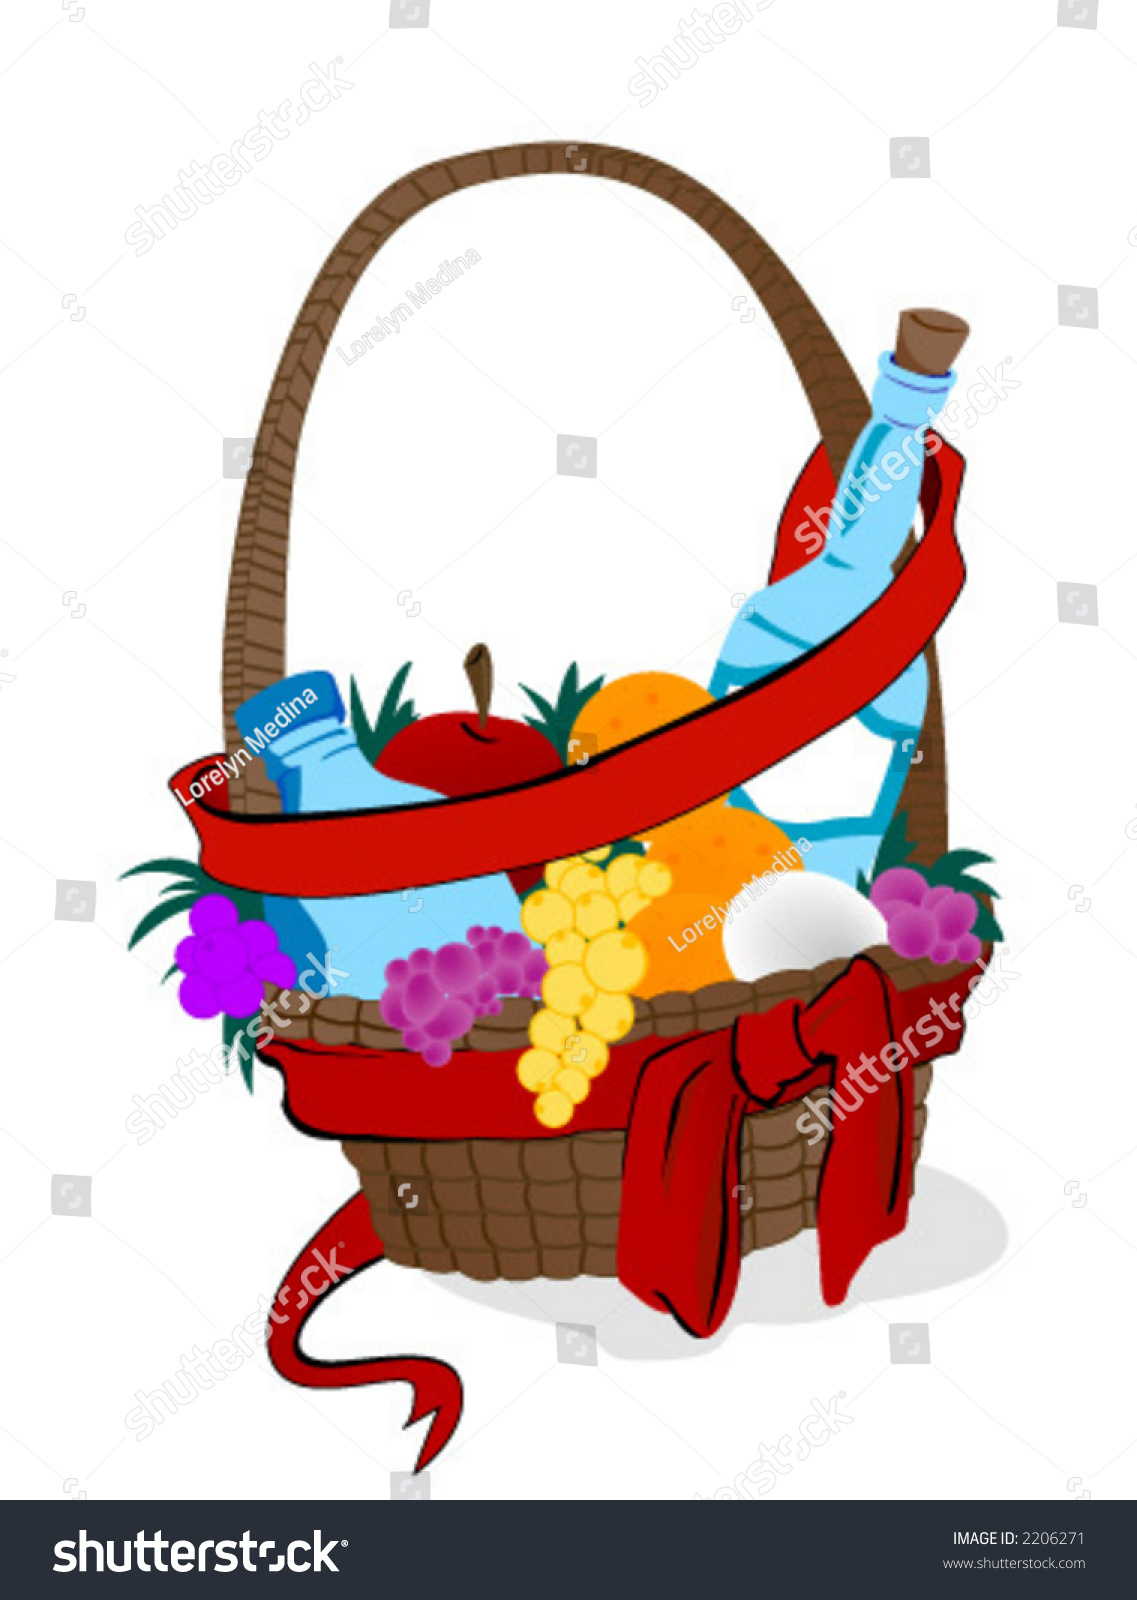 free clipart gift baskets - photo #46